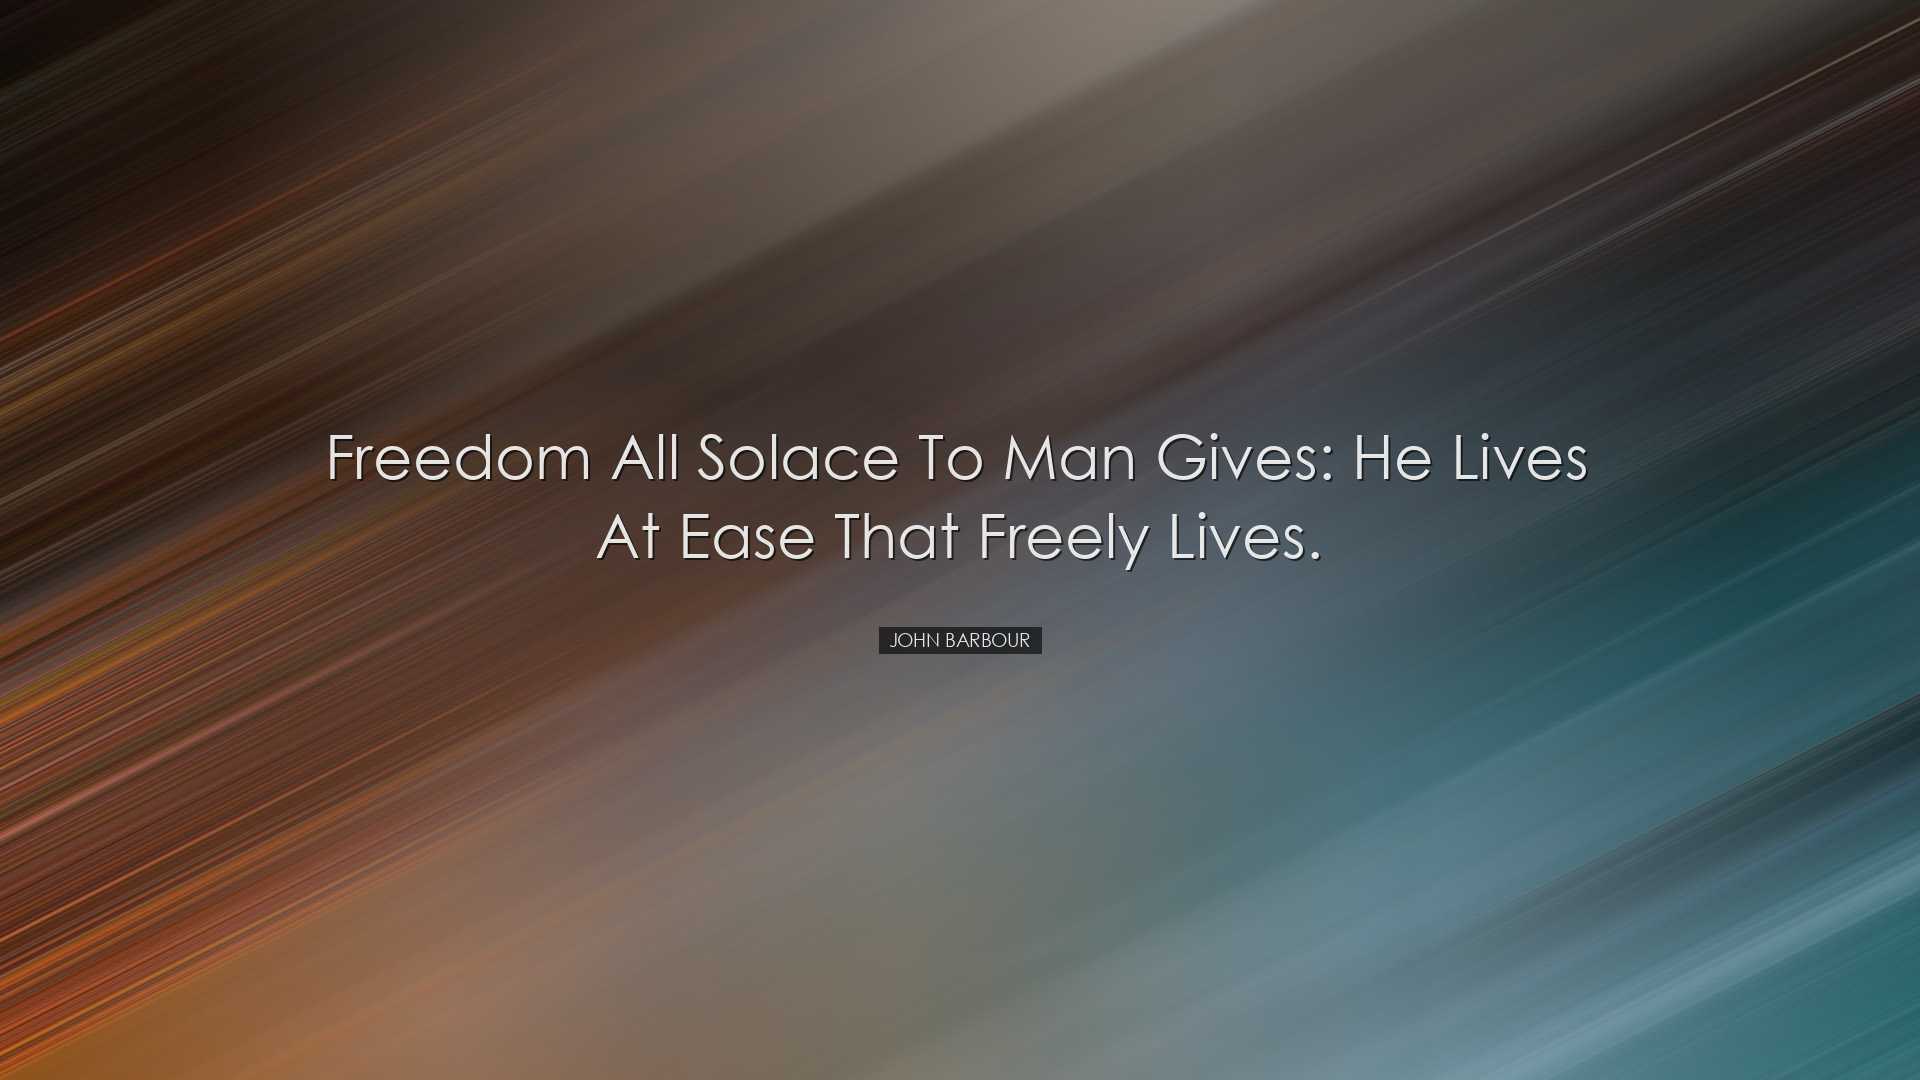 Freedom all solace to man gives: He lives at ease that freely live